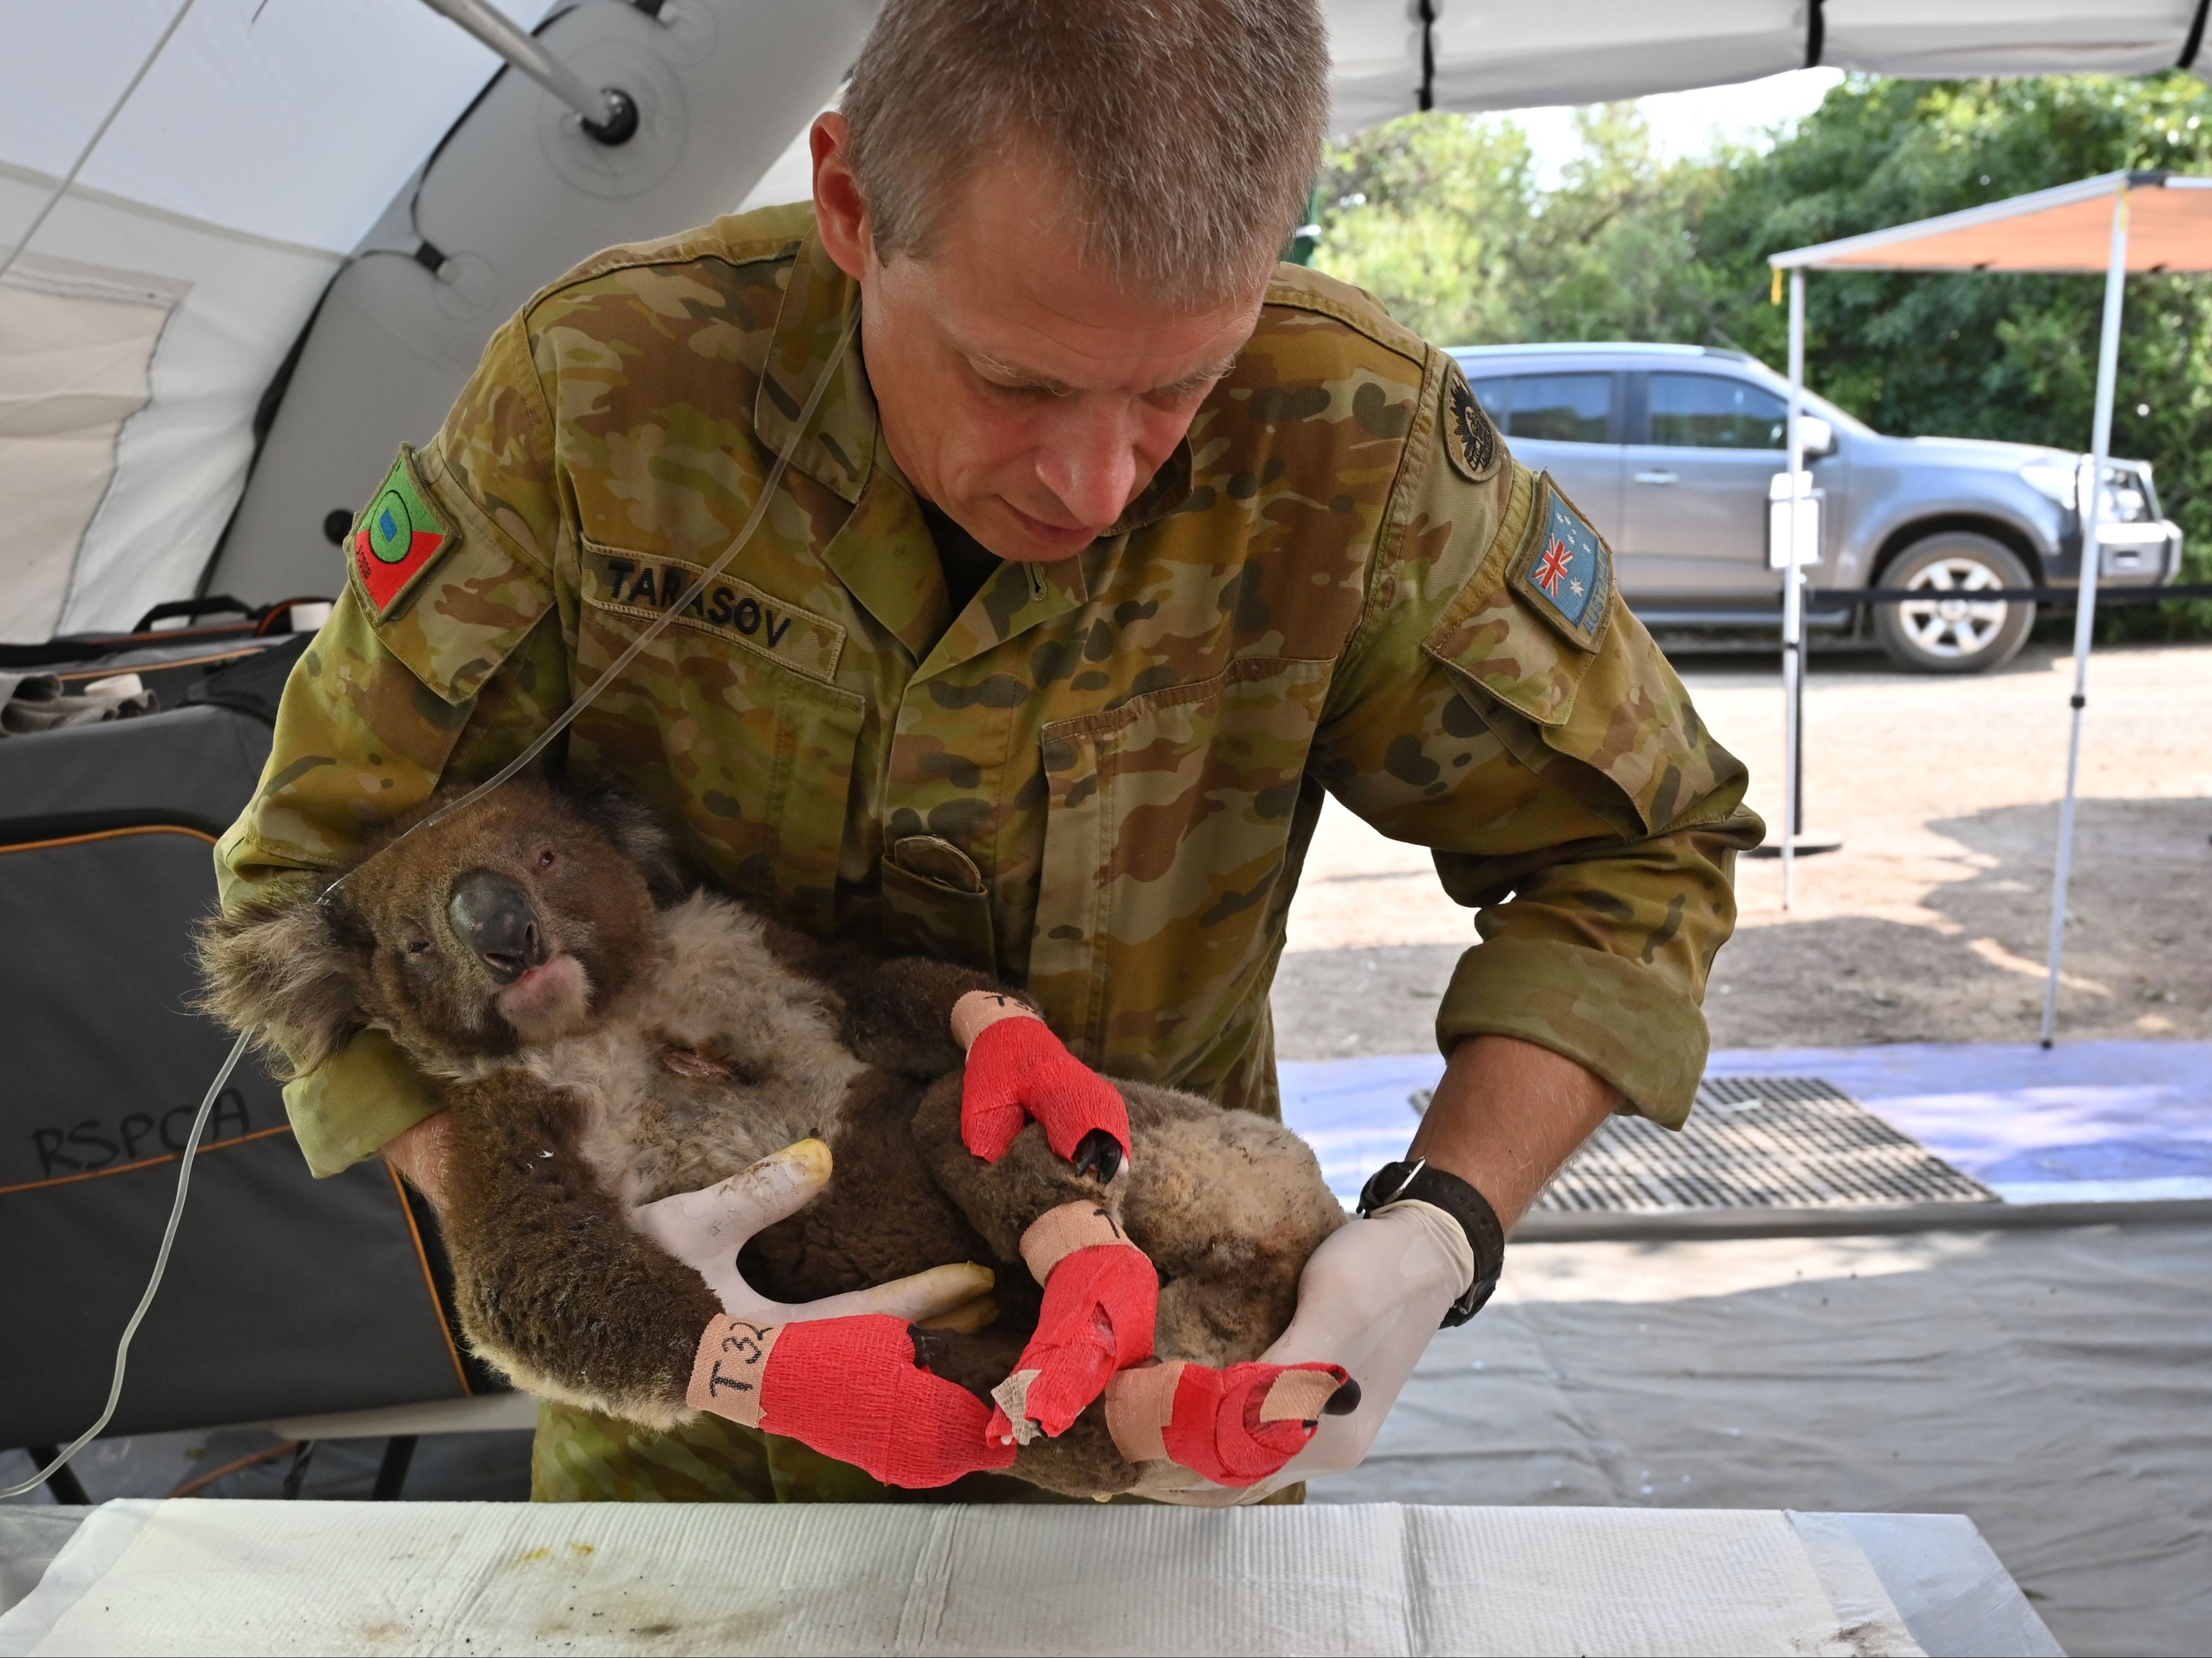 A member of the Australian Defence Force picks up an injured koala after it was treated for burns at a makeshift hospital on Kangaroo Island on 14 January